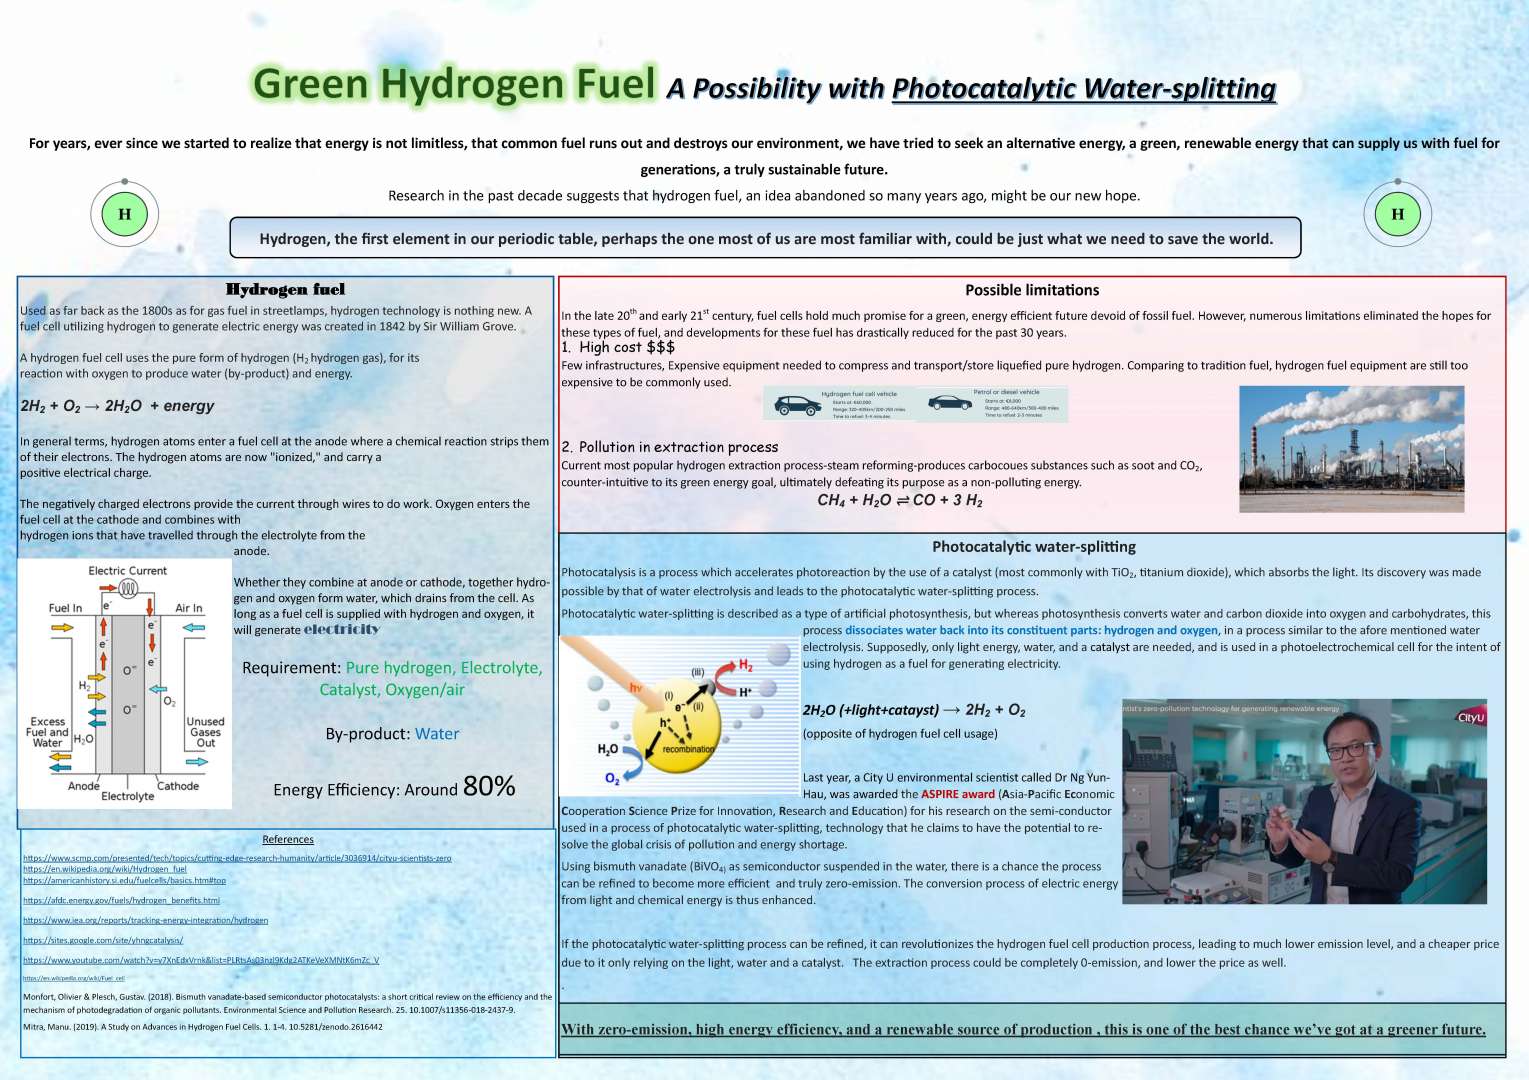 Green Hydrogen Fuel – A possibility with Photocatalytic Water-splitting